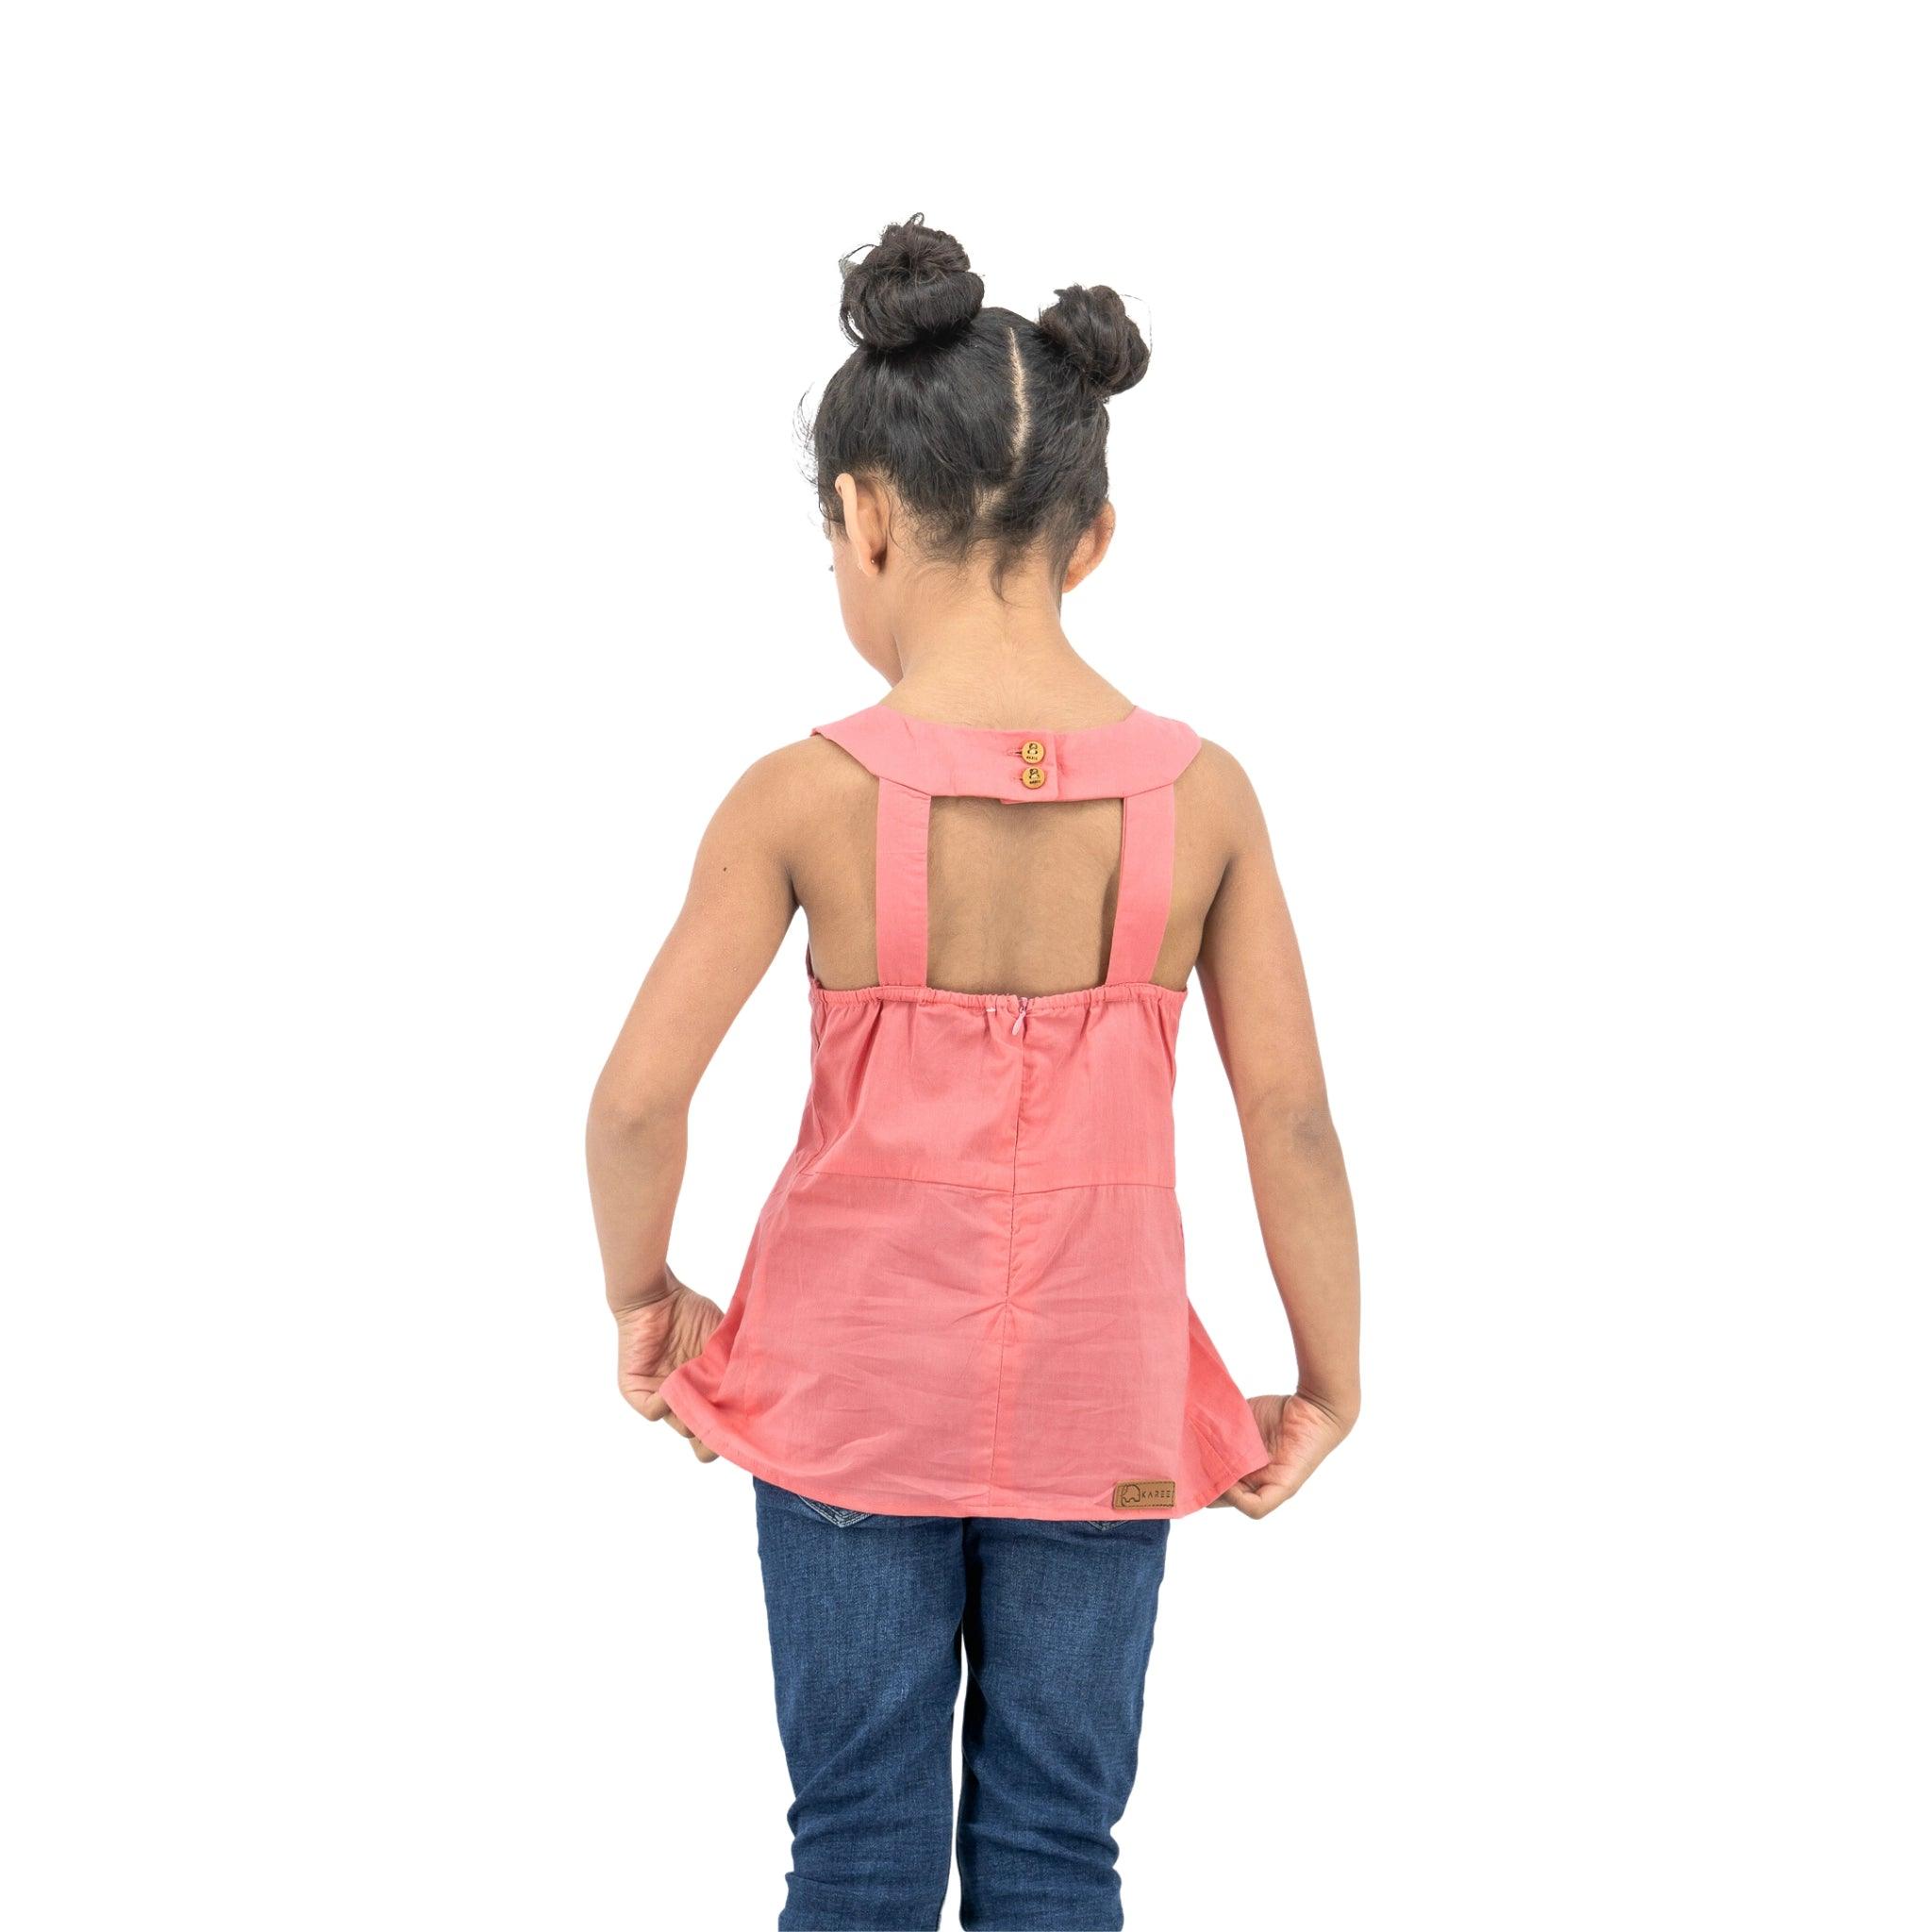 Young girl with back to camera, wearing a Karee Tea Rose Cotton Bib Neck Top for kids and blue jeans, against a white background.